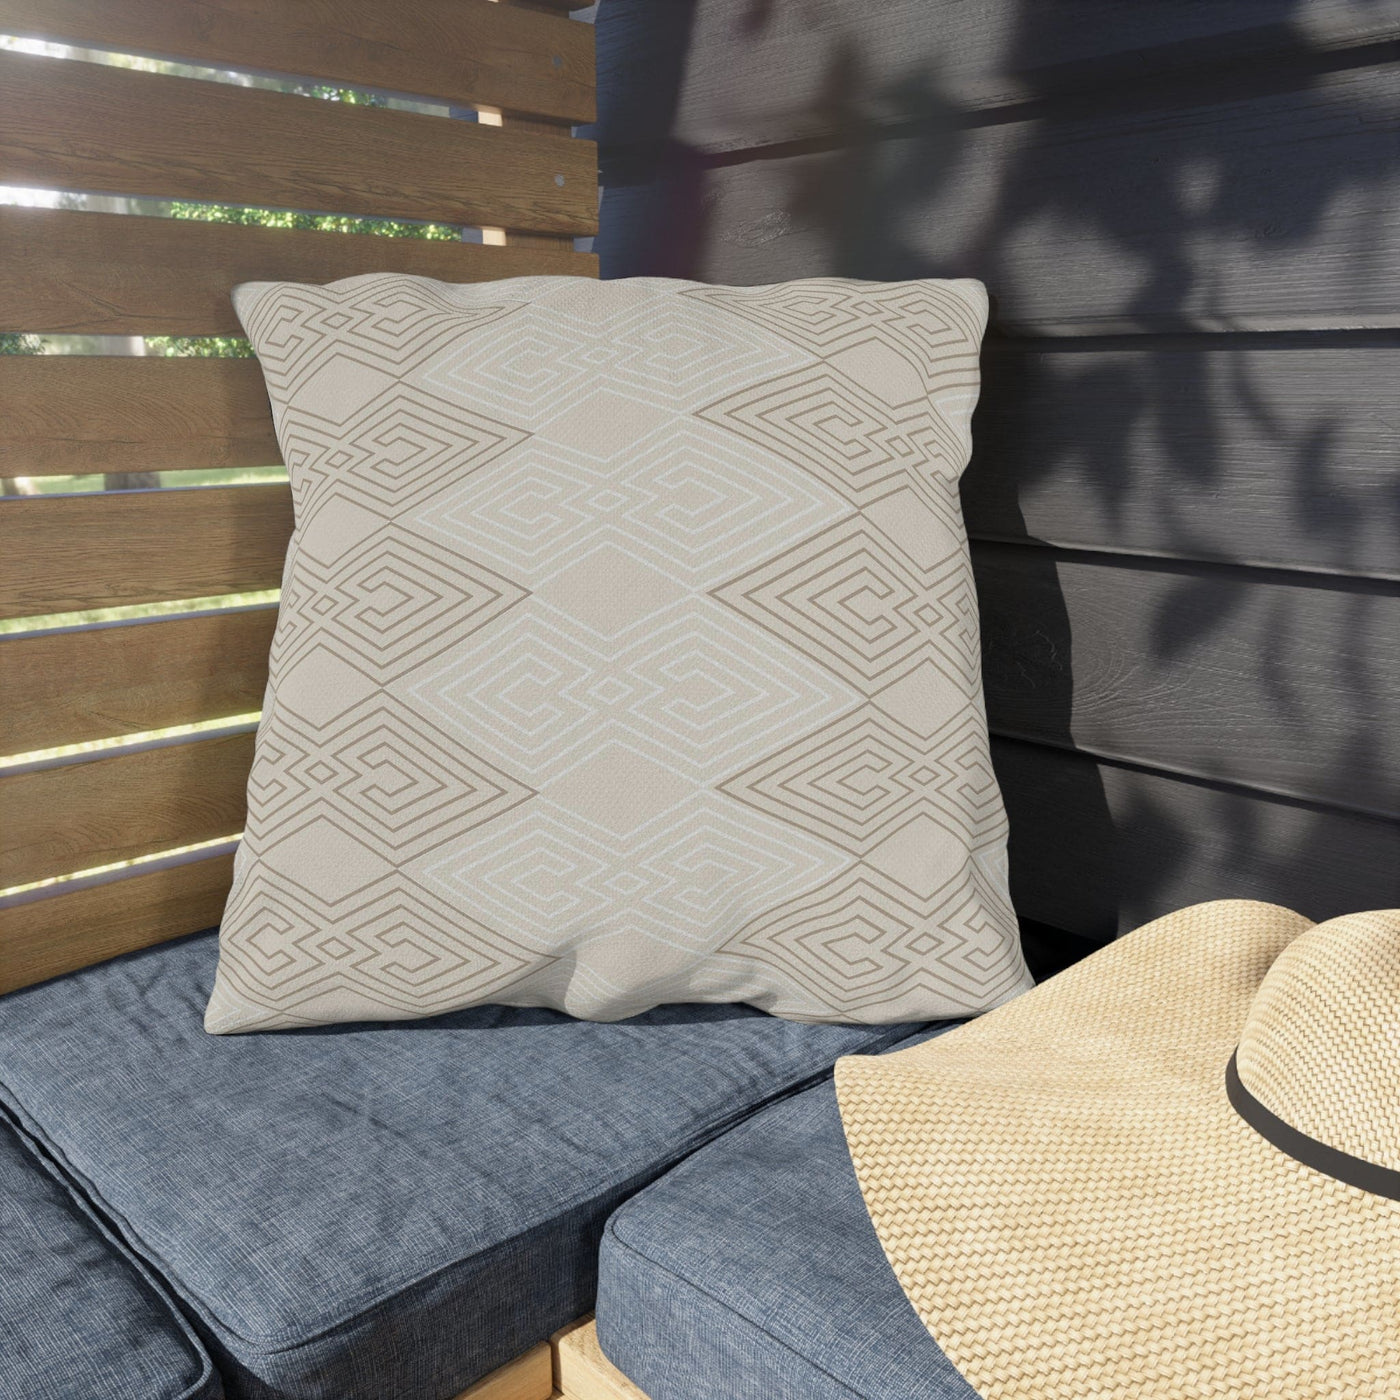 Decorative Outdoor Pillows - Set Of 2 Beige And White Tribal Geometric Aztec